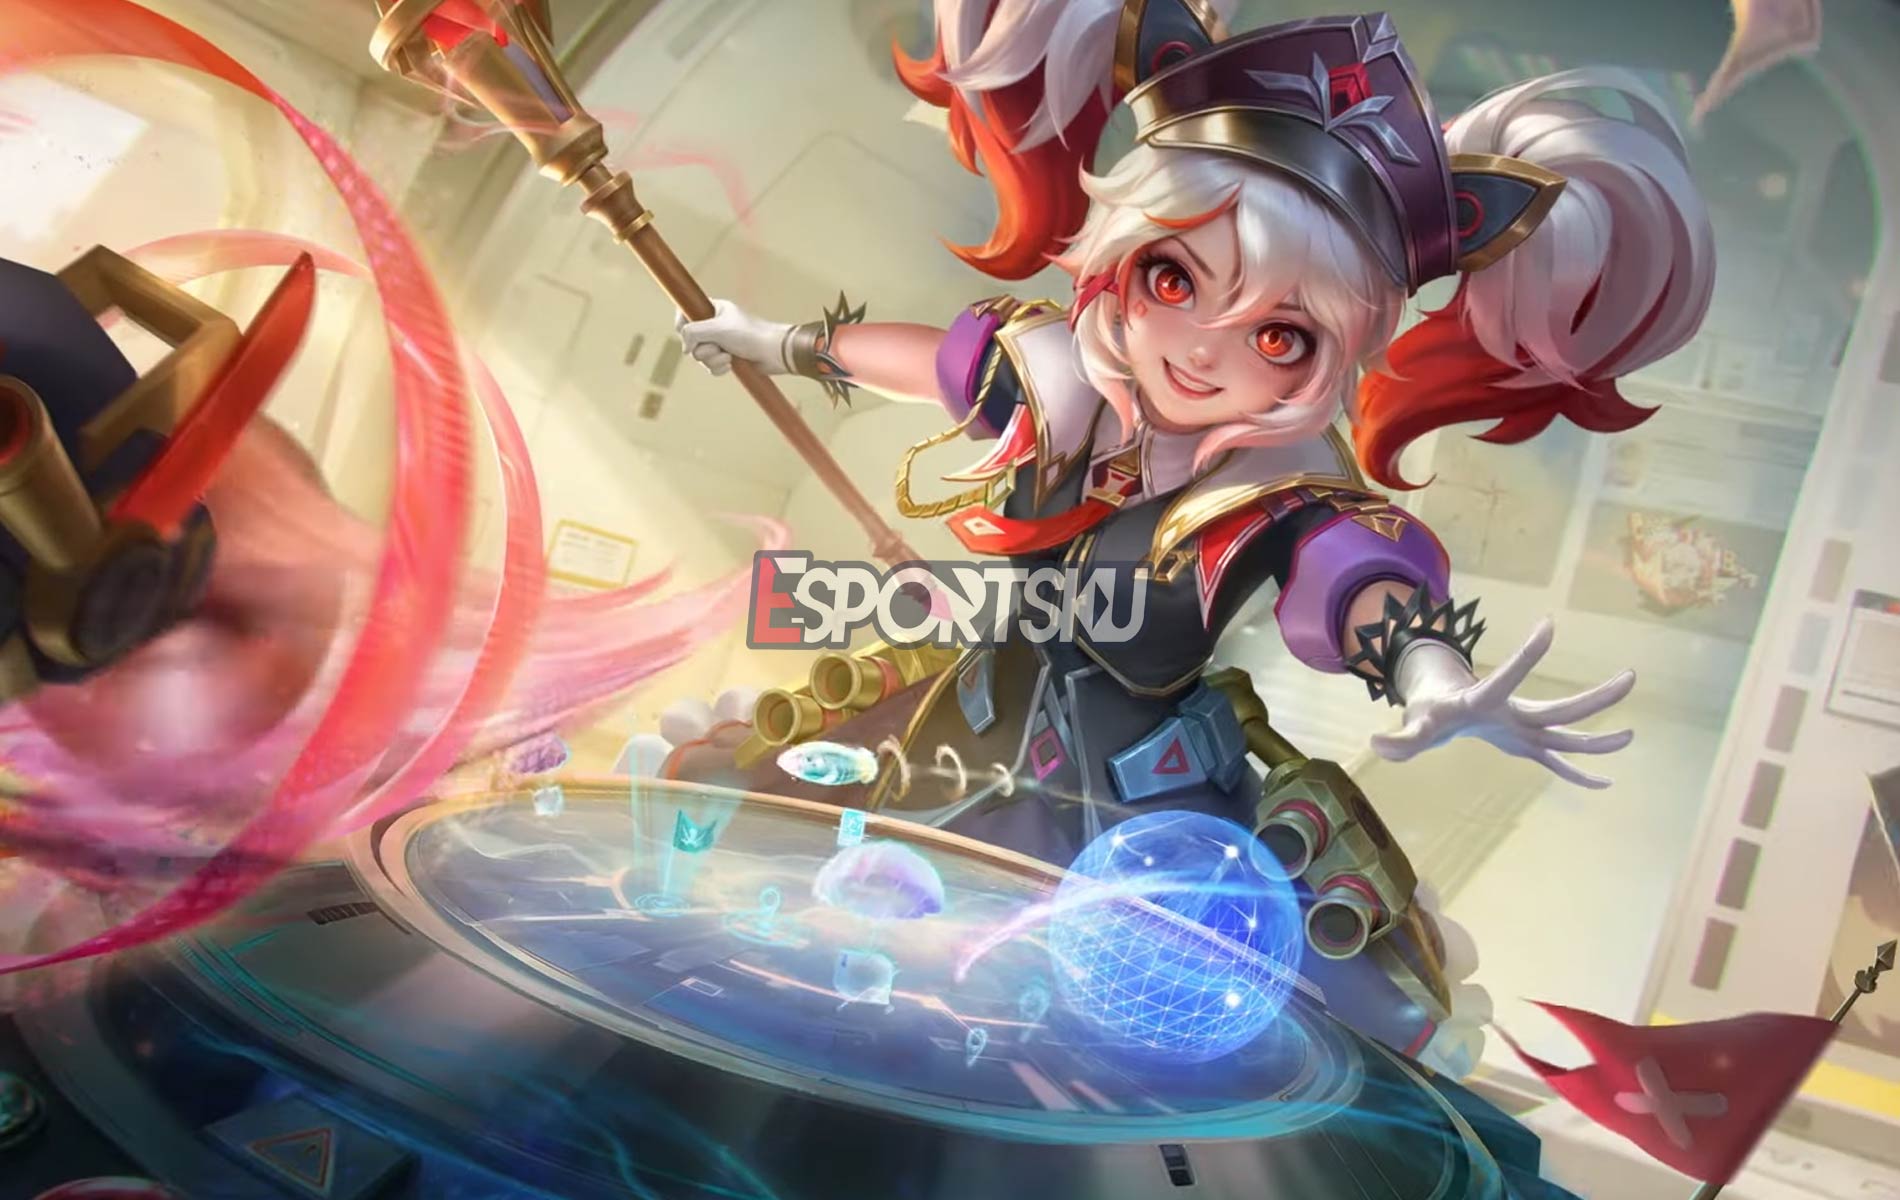 How to Get Lylia Magitech Arsenal Mobile Legends (ML) Skin